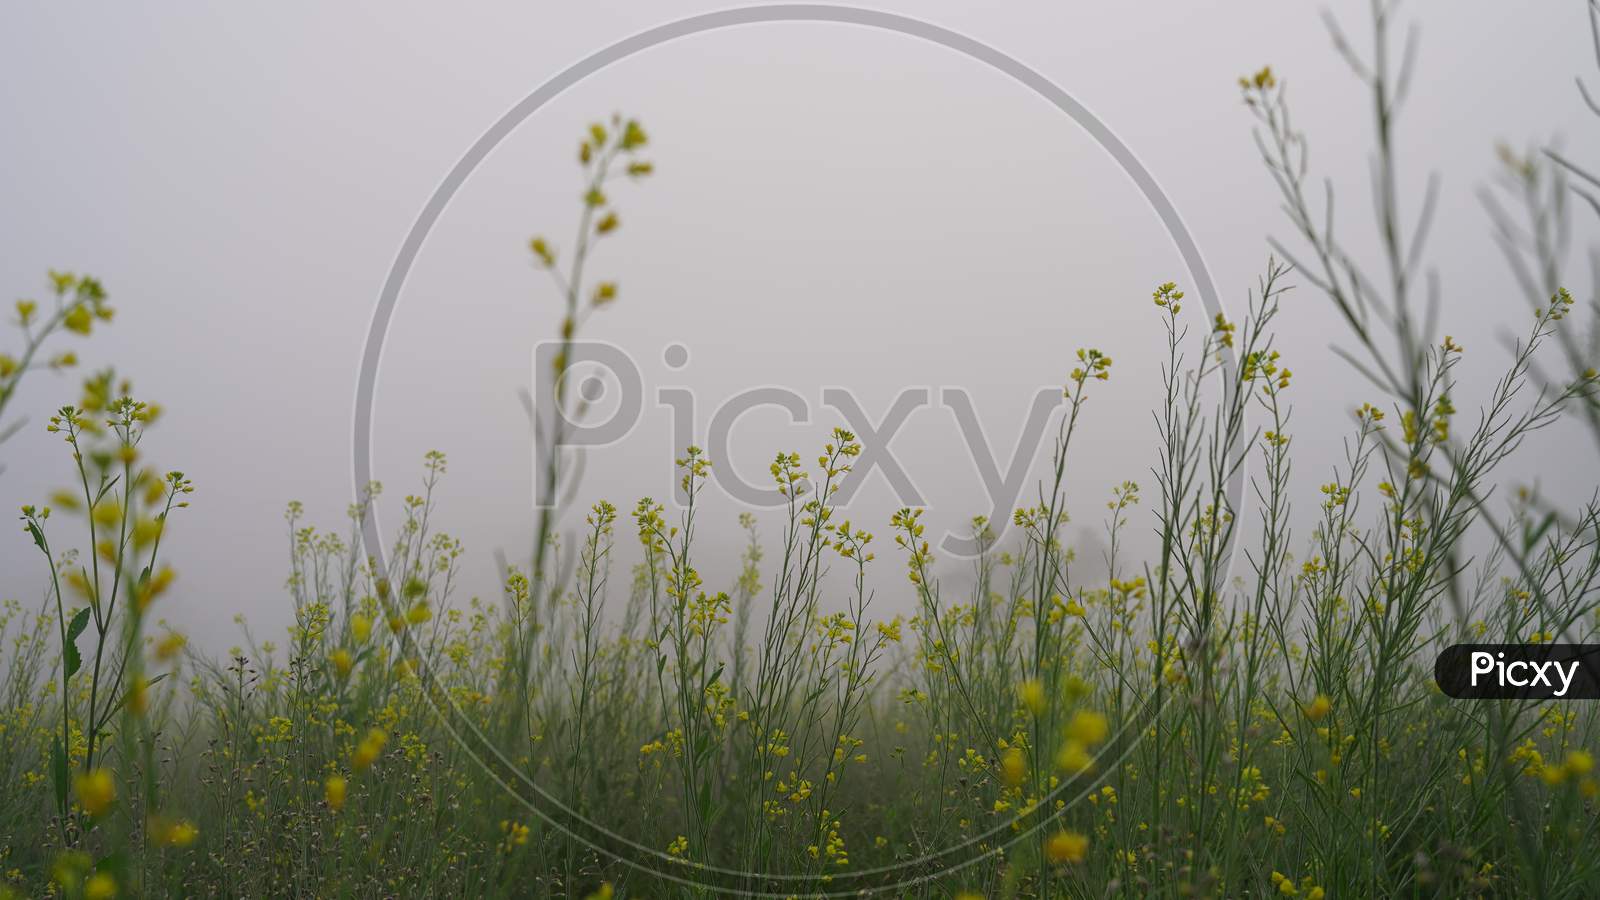 Blossoming Yellow Flowers Against Heavy White Mist Or Fog In The Early Morning. Agriculture Concept.